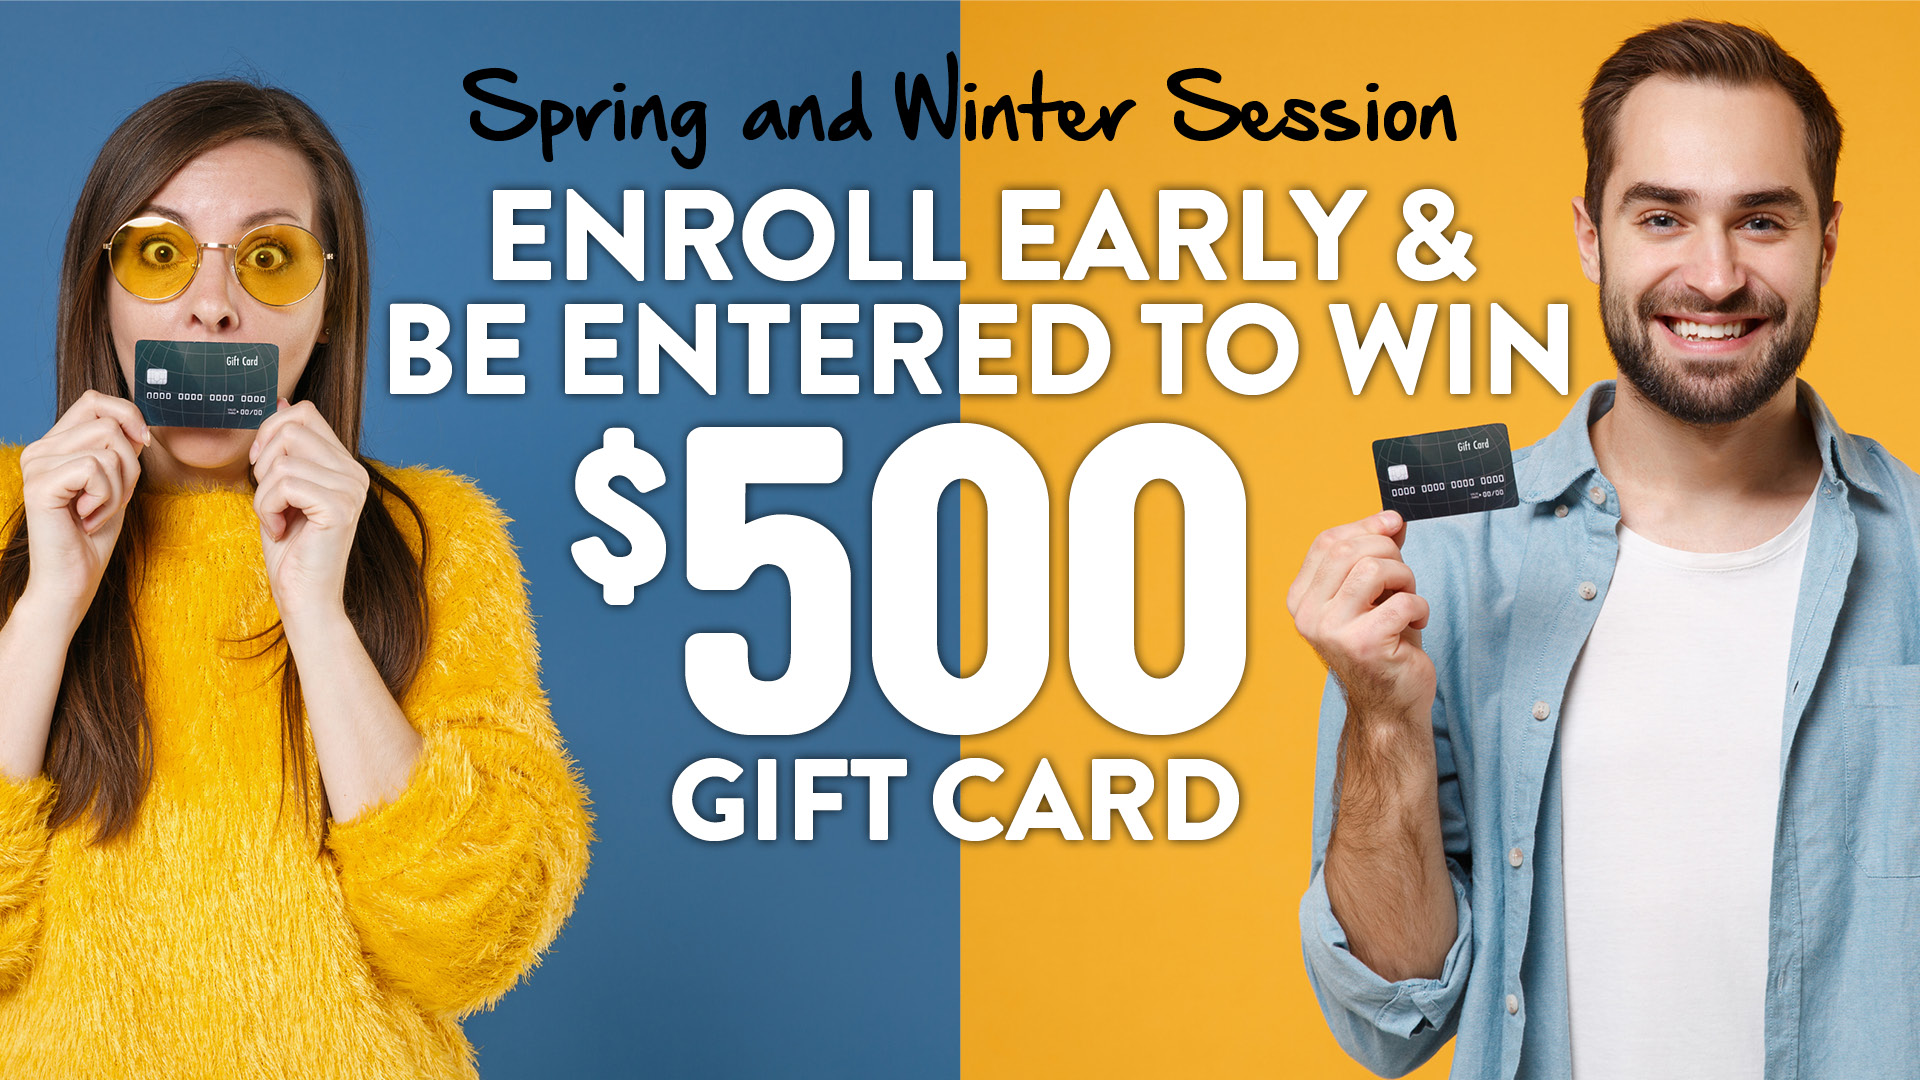 Returning Students, Enroll Early and Be Entered to Win One of Three $250 Gift Cards